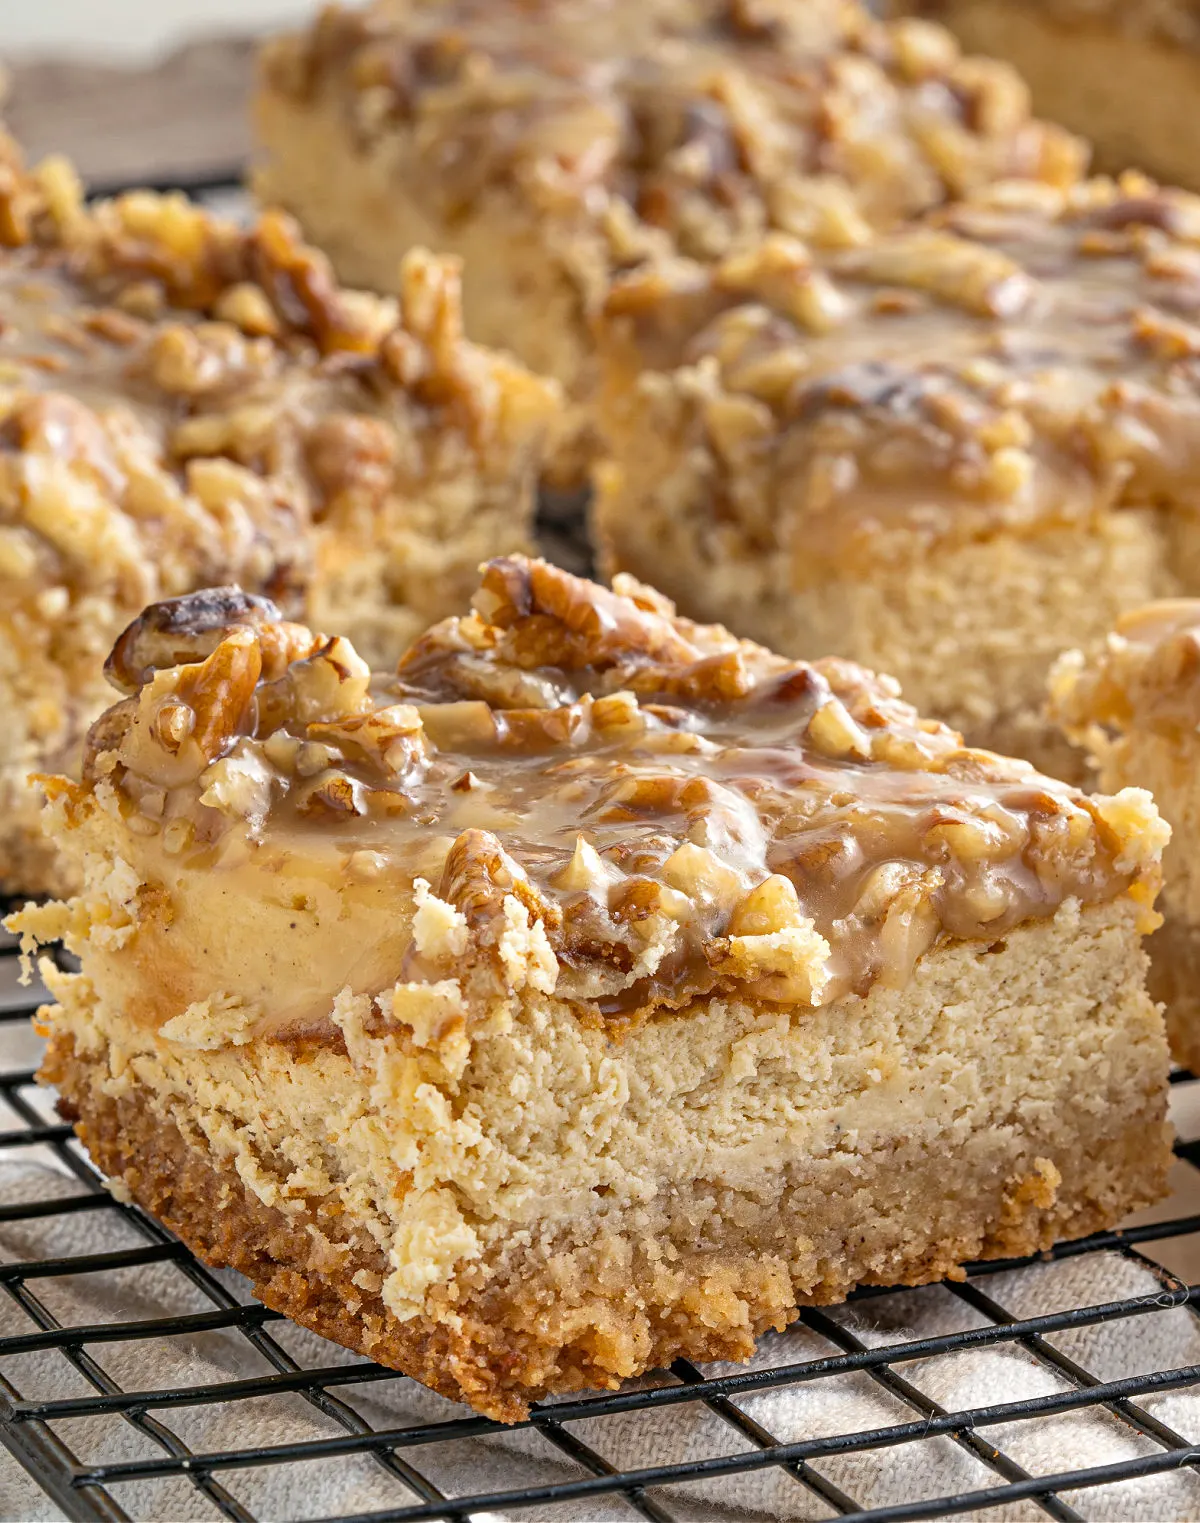 Gluten free cheesecake bars with cinnamon and pecan topping.